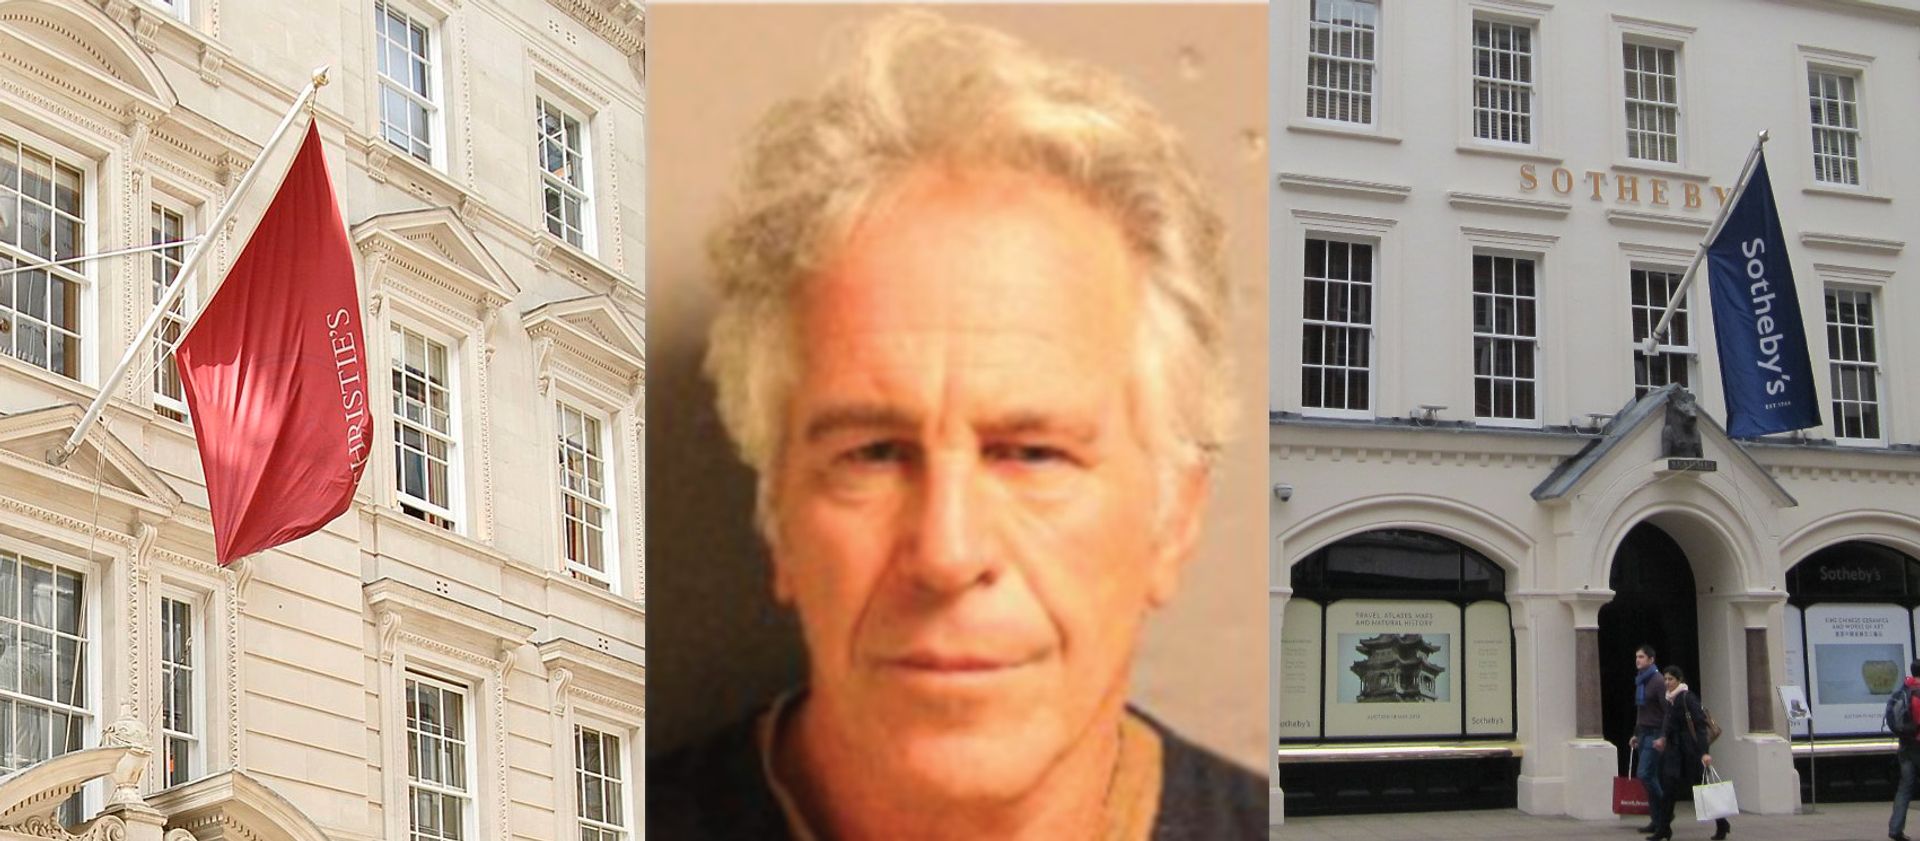 Sotheby's and Chrisitie's have been ordered to hand over all documents related to the late financier Jeffrey Epstein 